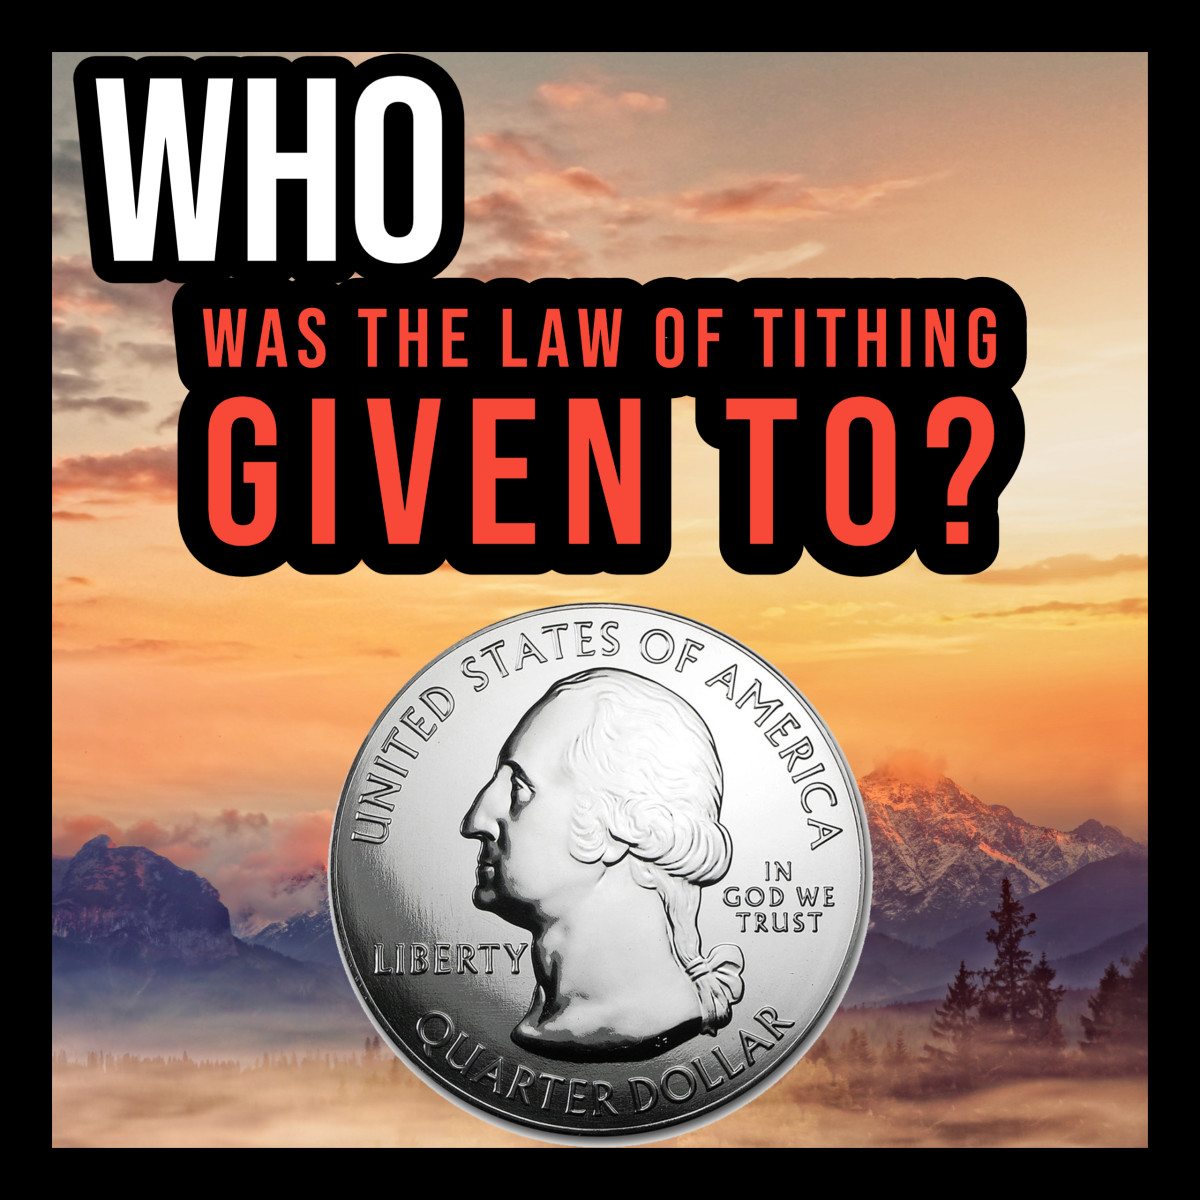 Who was the Law of Tithing given to?